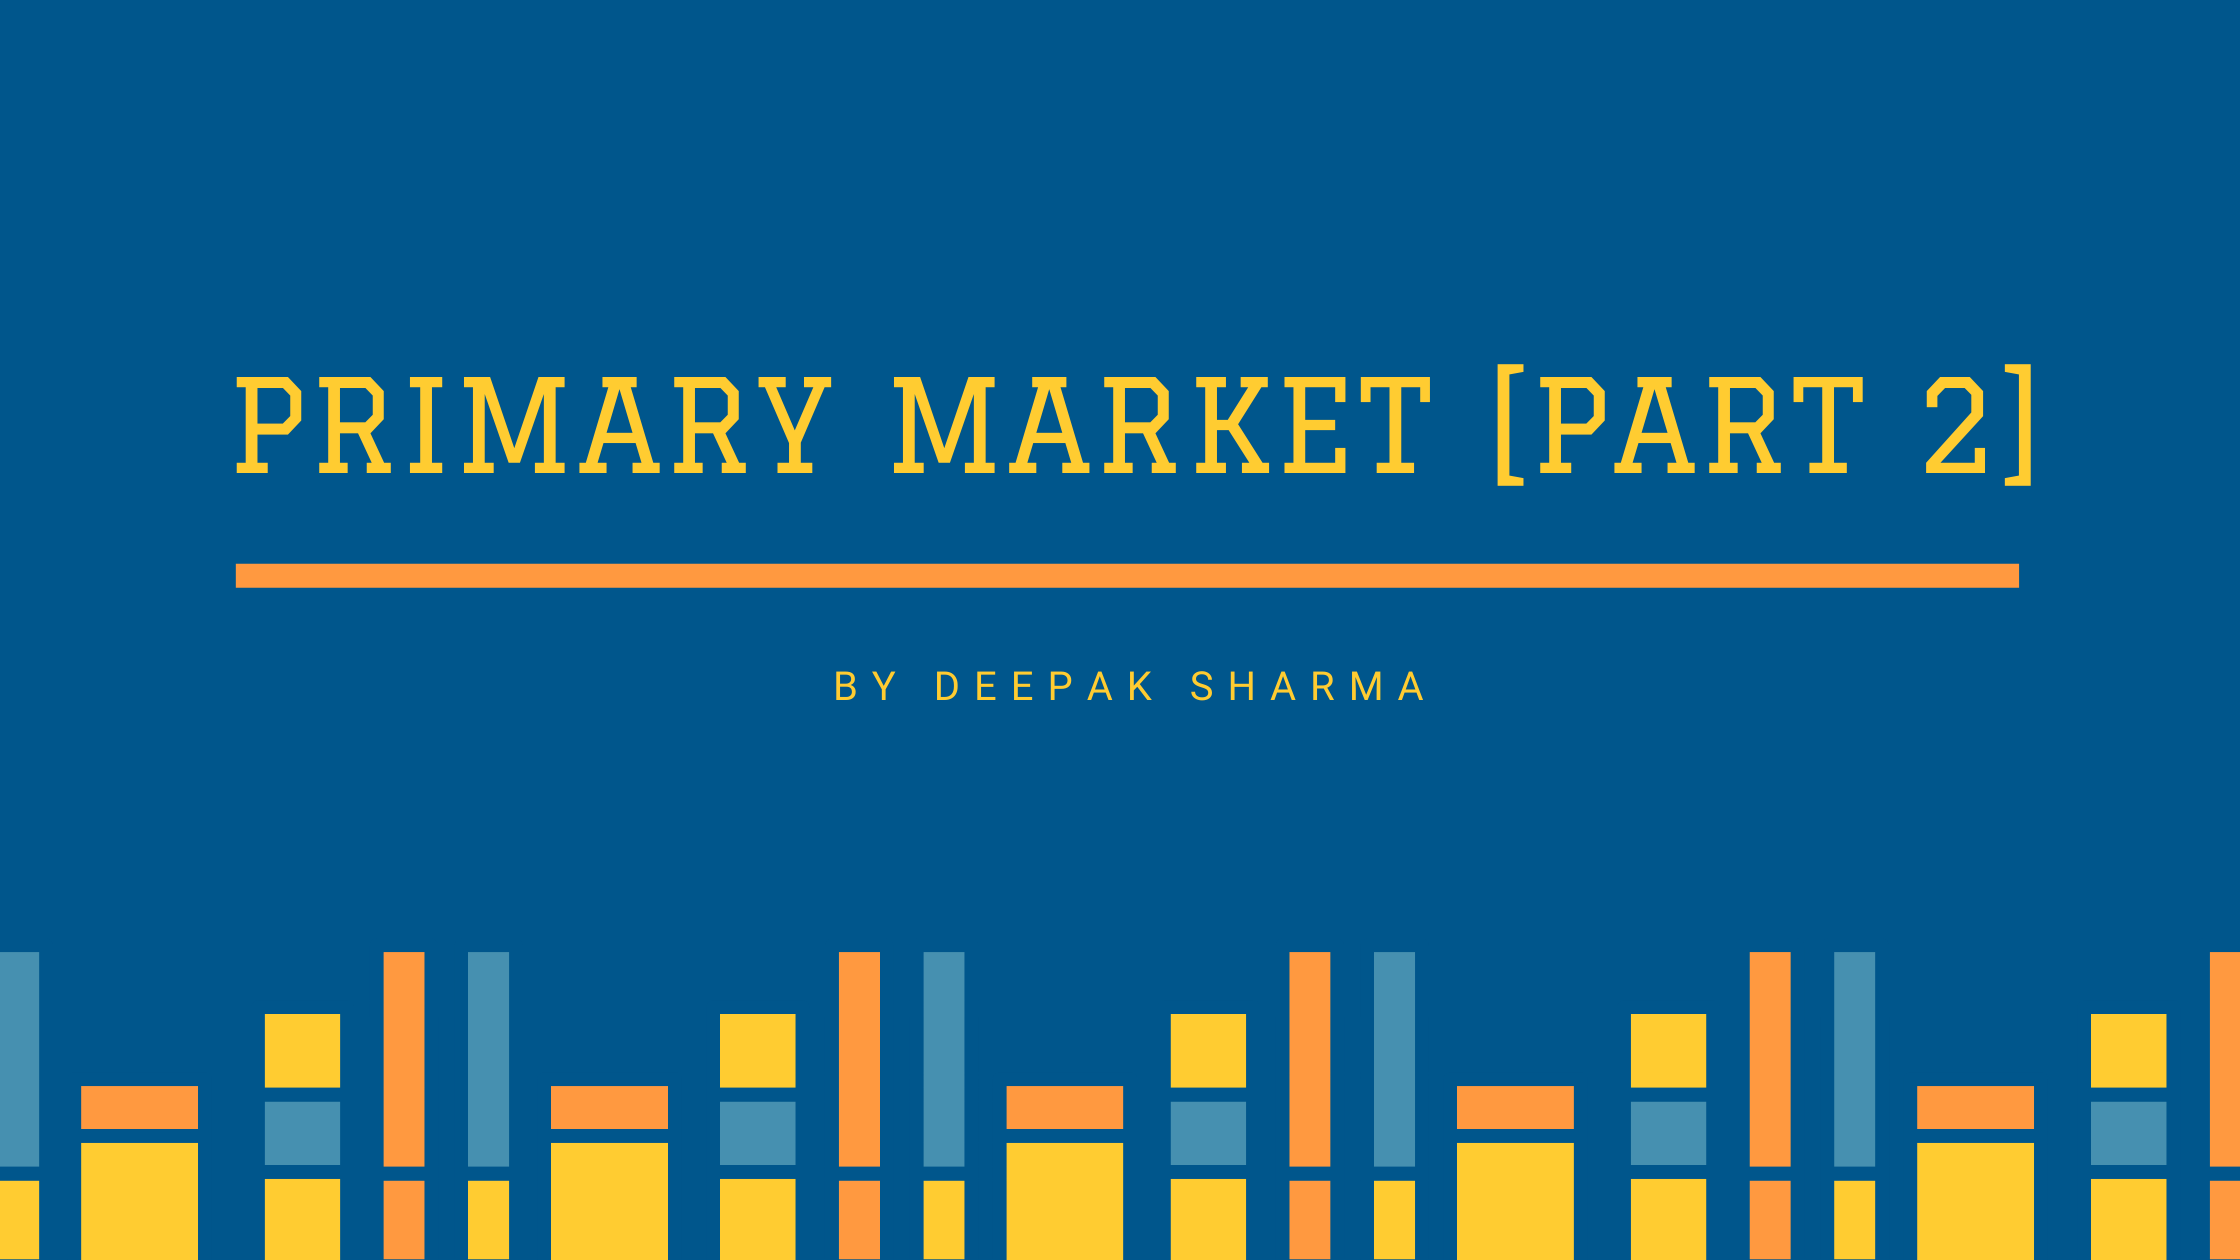 what are the primary market